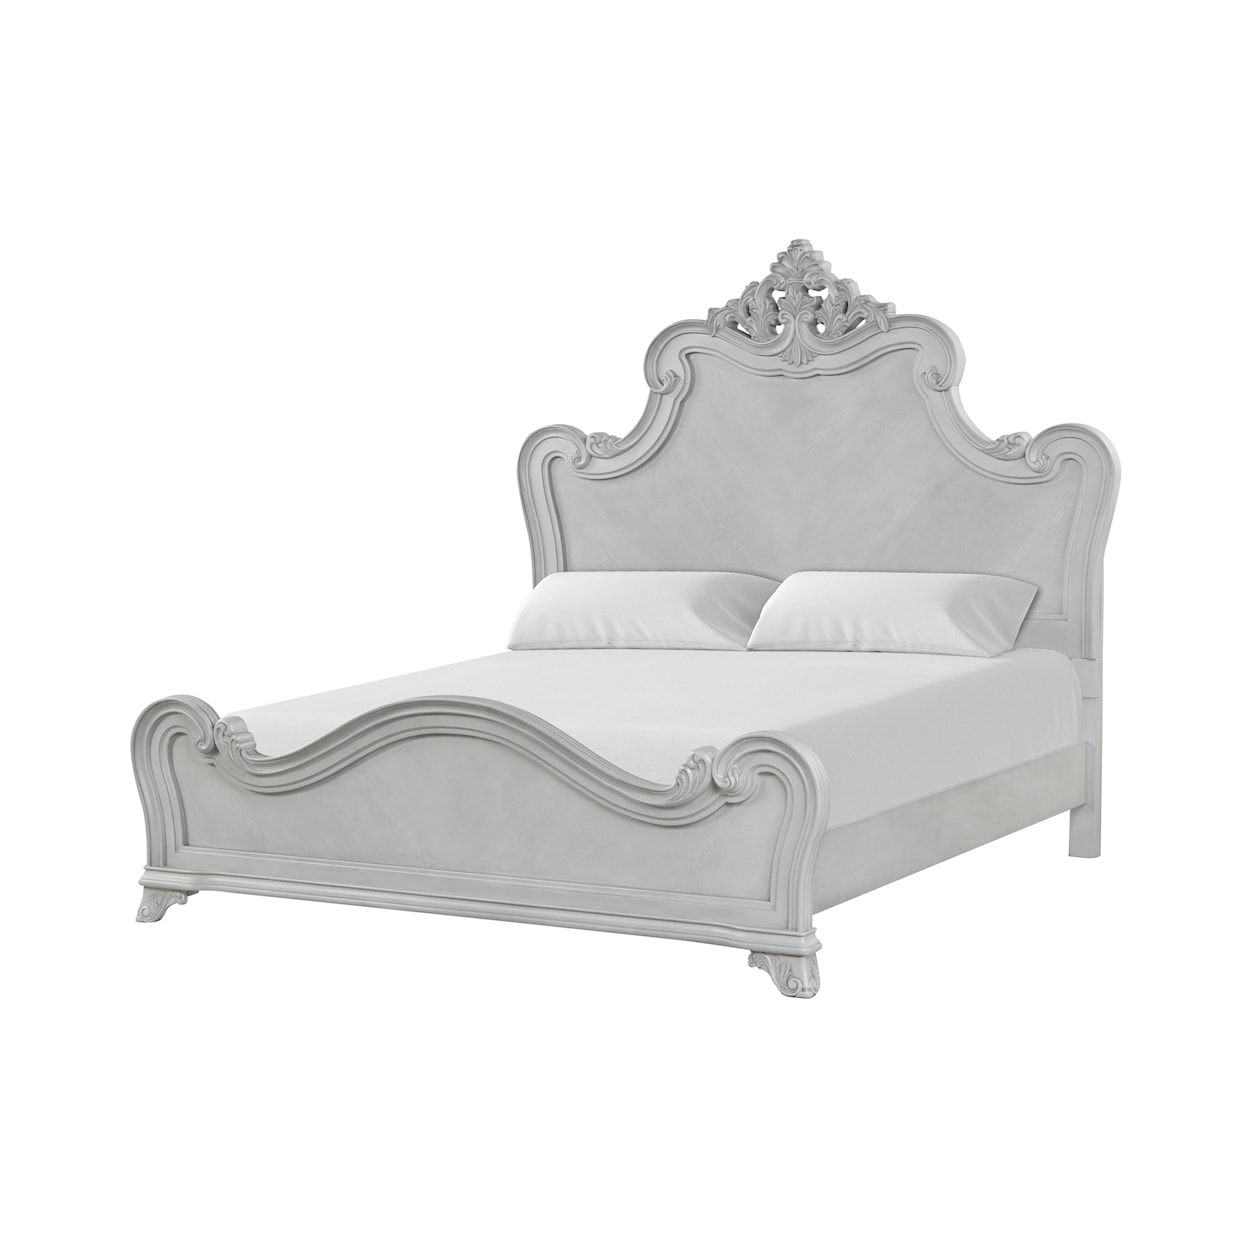 New Classic Cambria Hills 5-Piece King Arched Bedroom Set